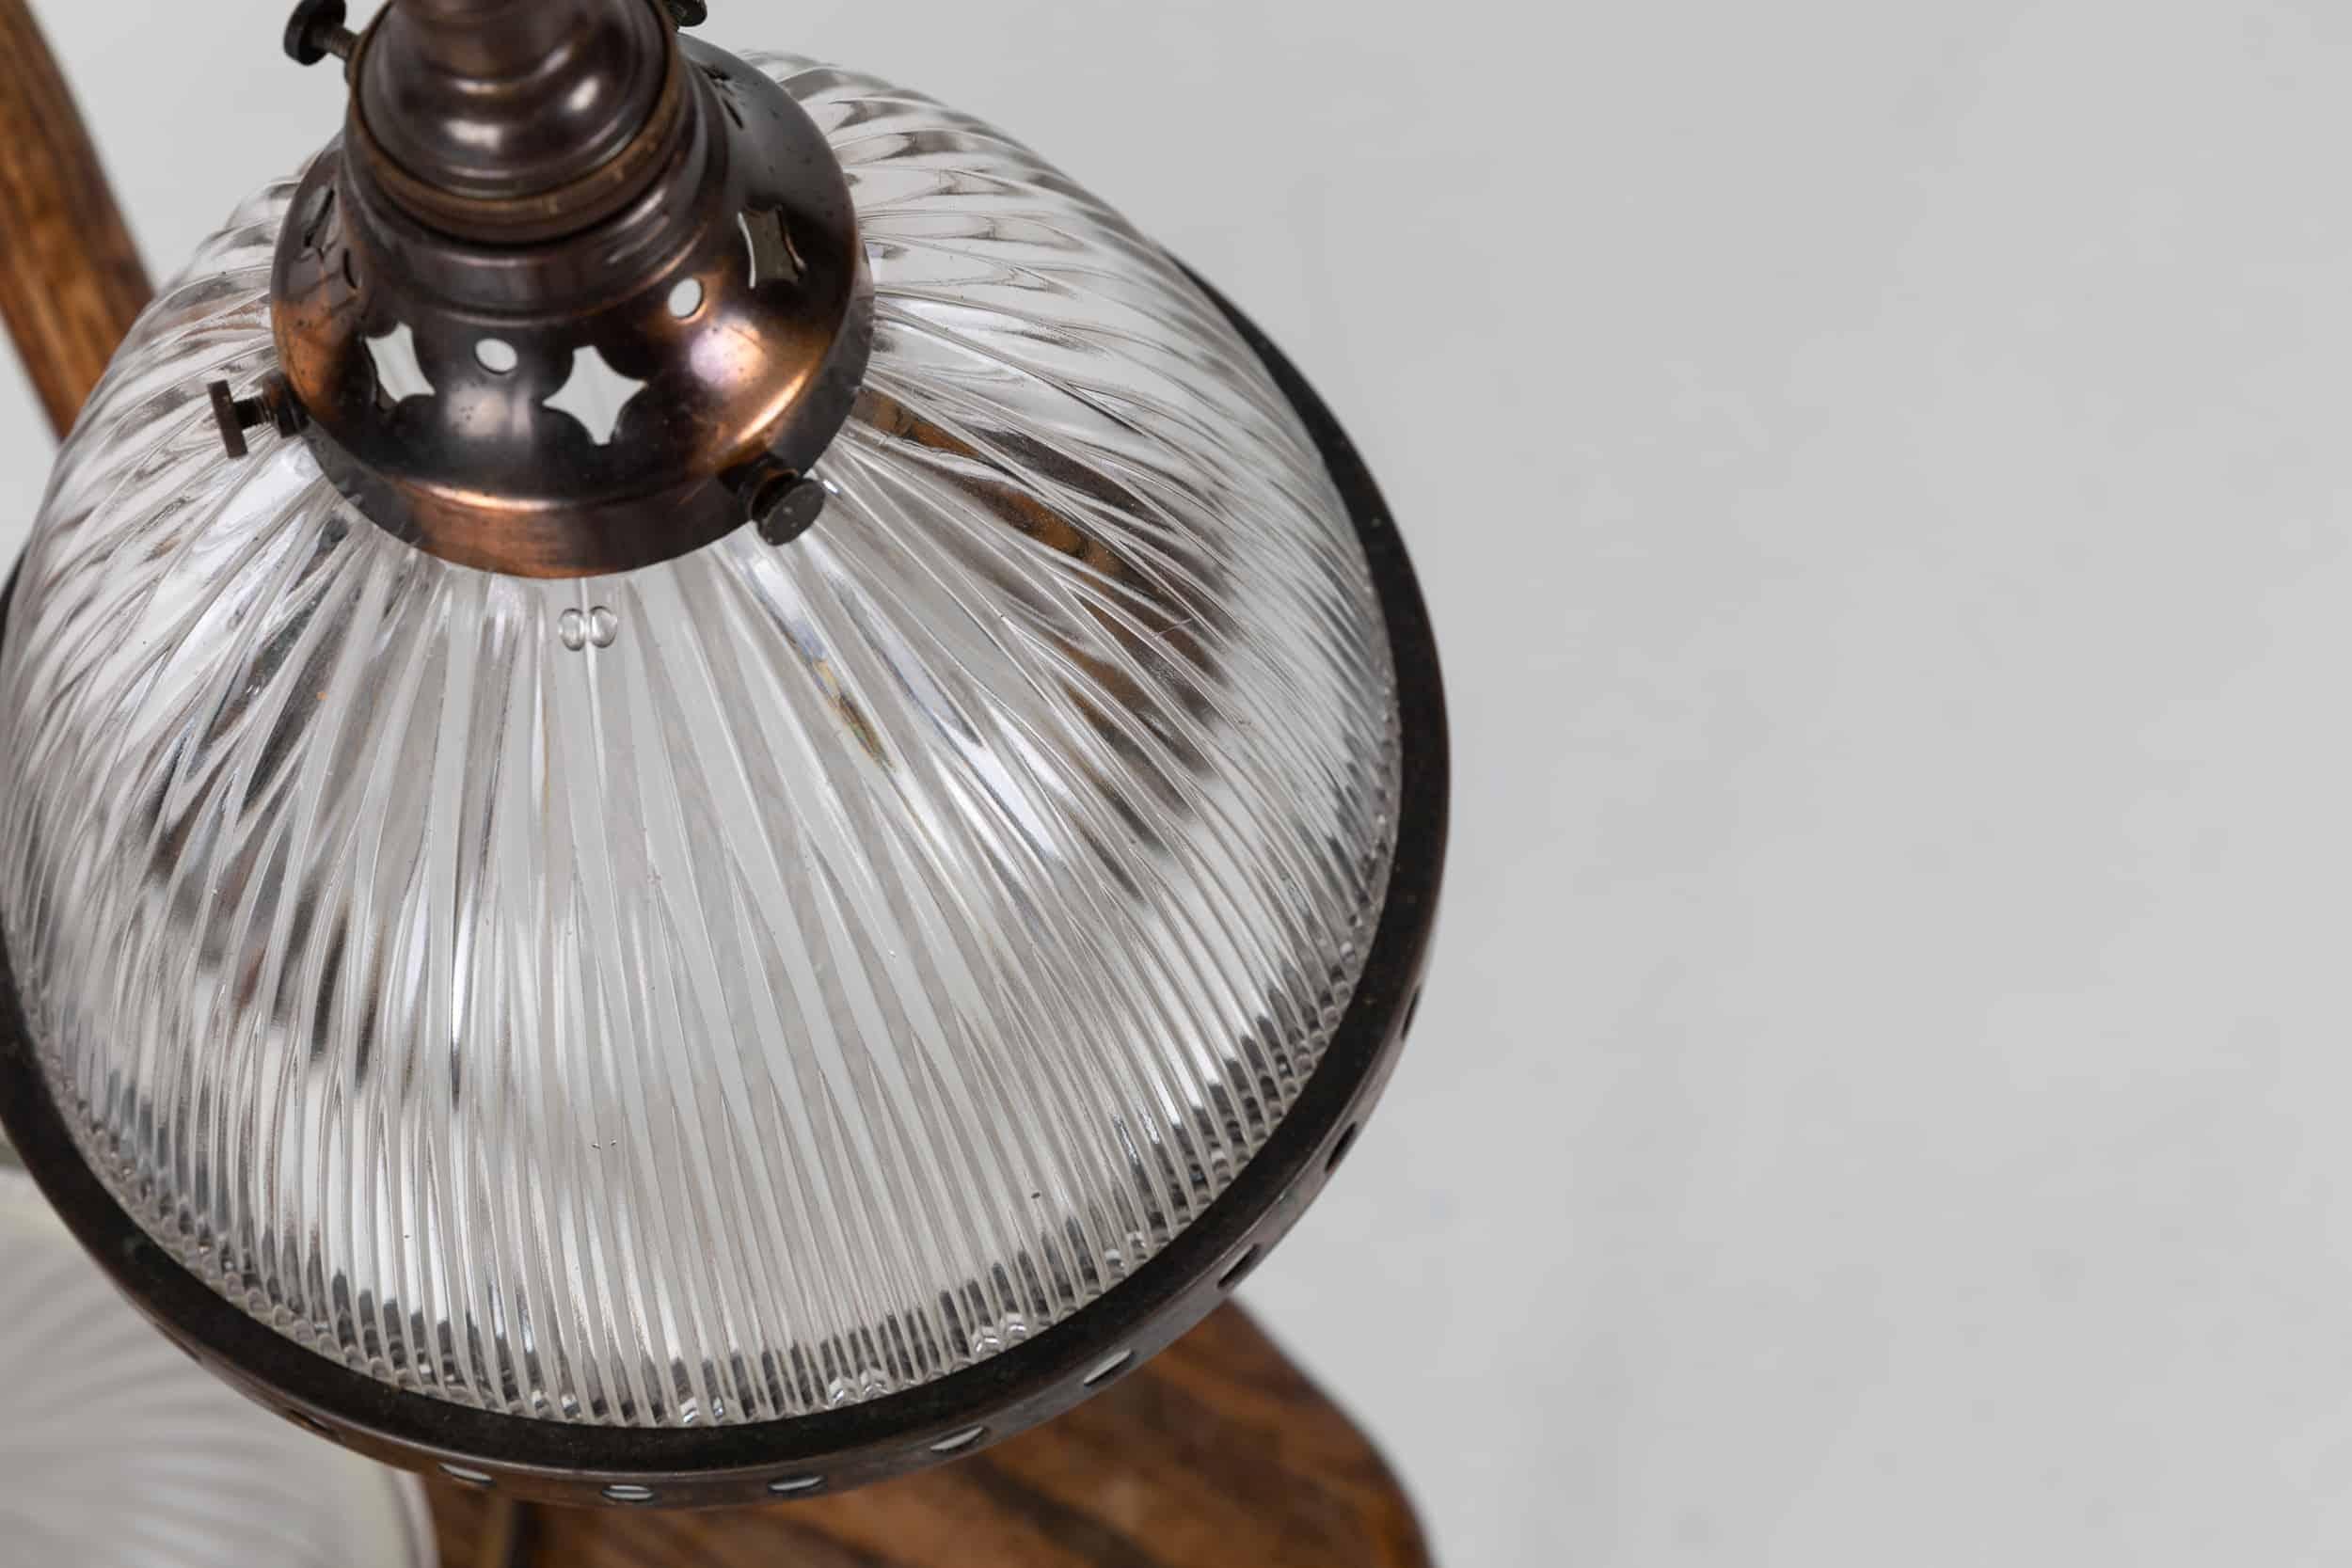 English Antique Holophane 'Excellite' French Prismatic Glass Pendant Lamp, C.1920